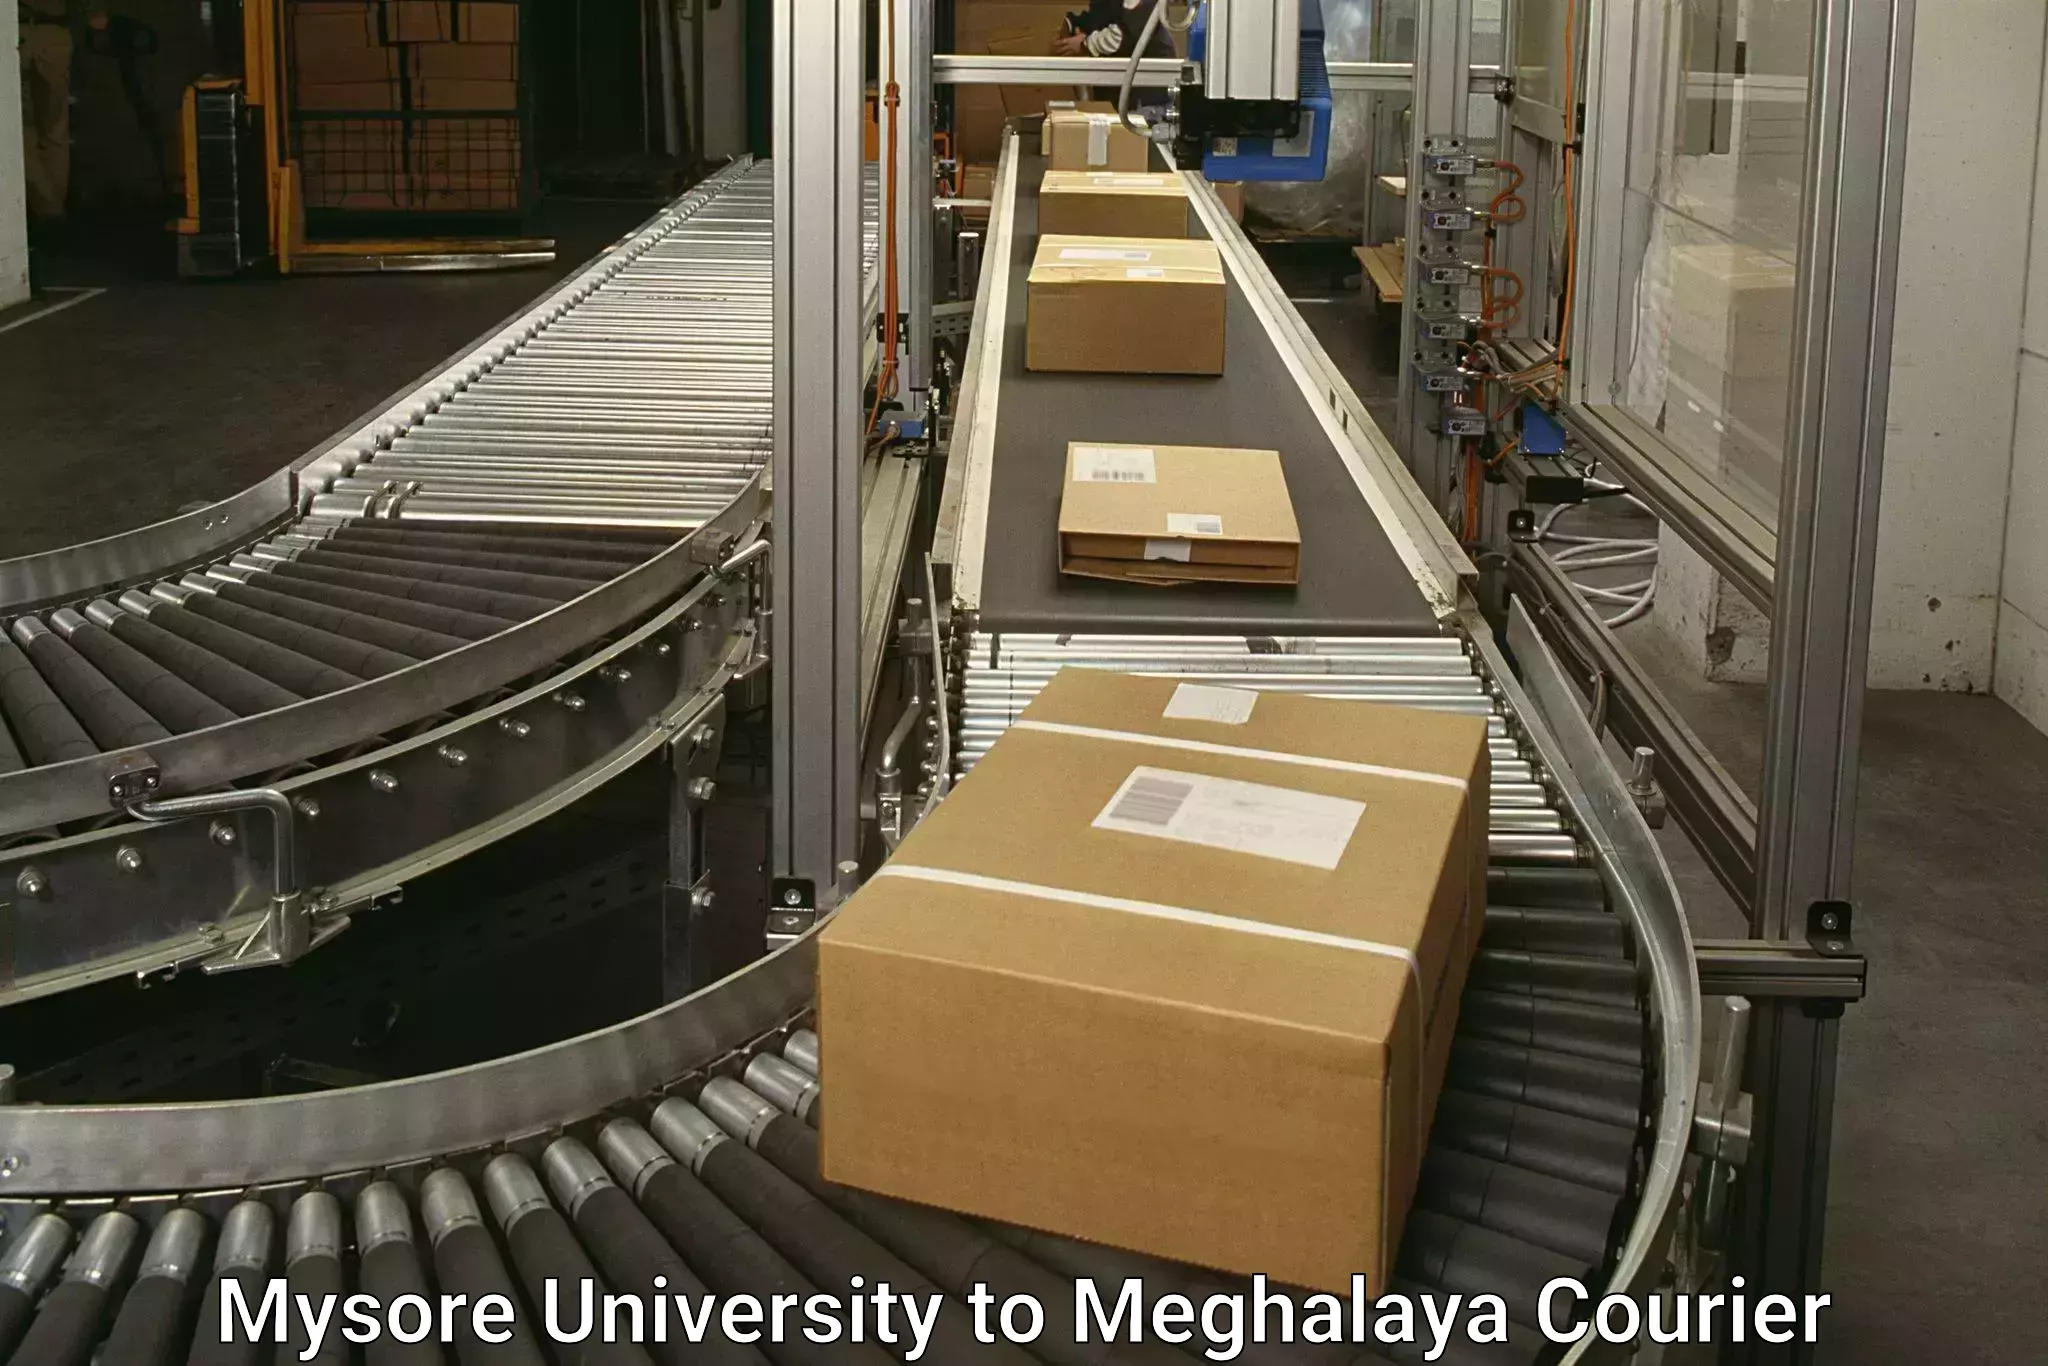 Nationwide parcel services Mysore University to Tura